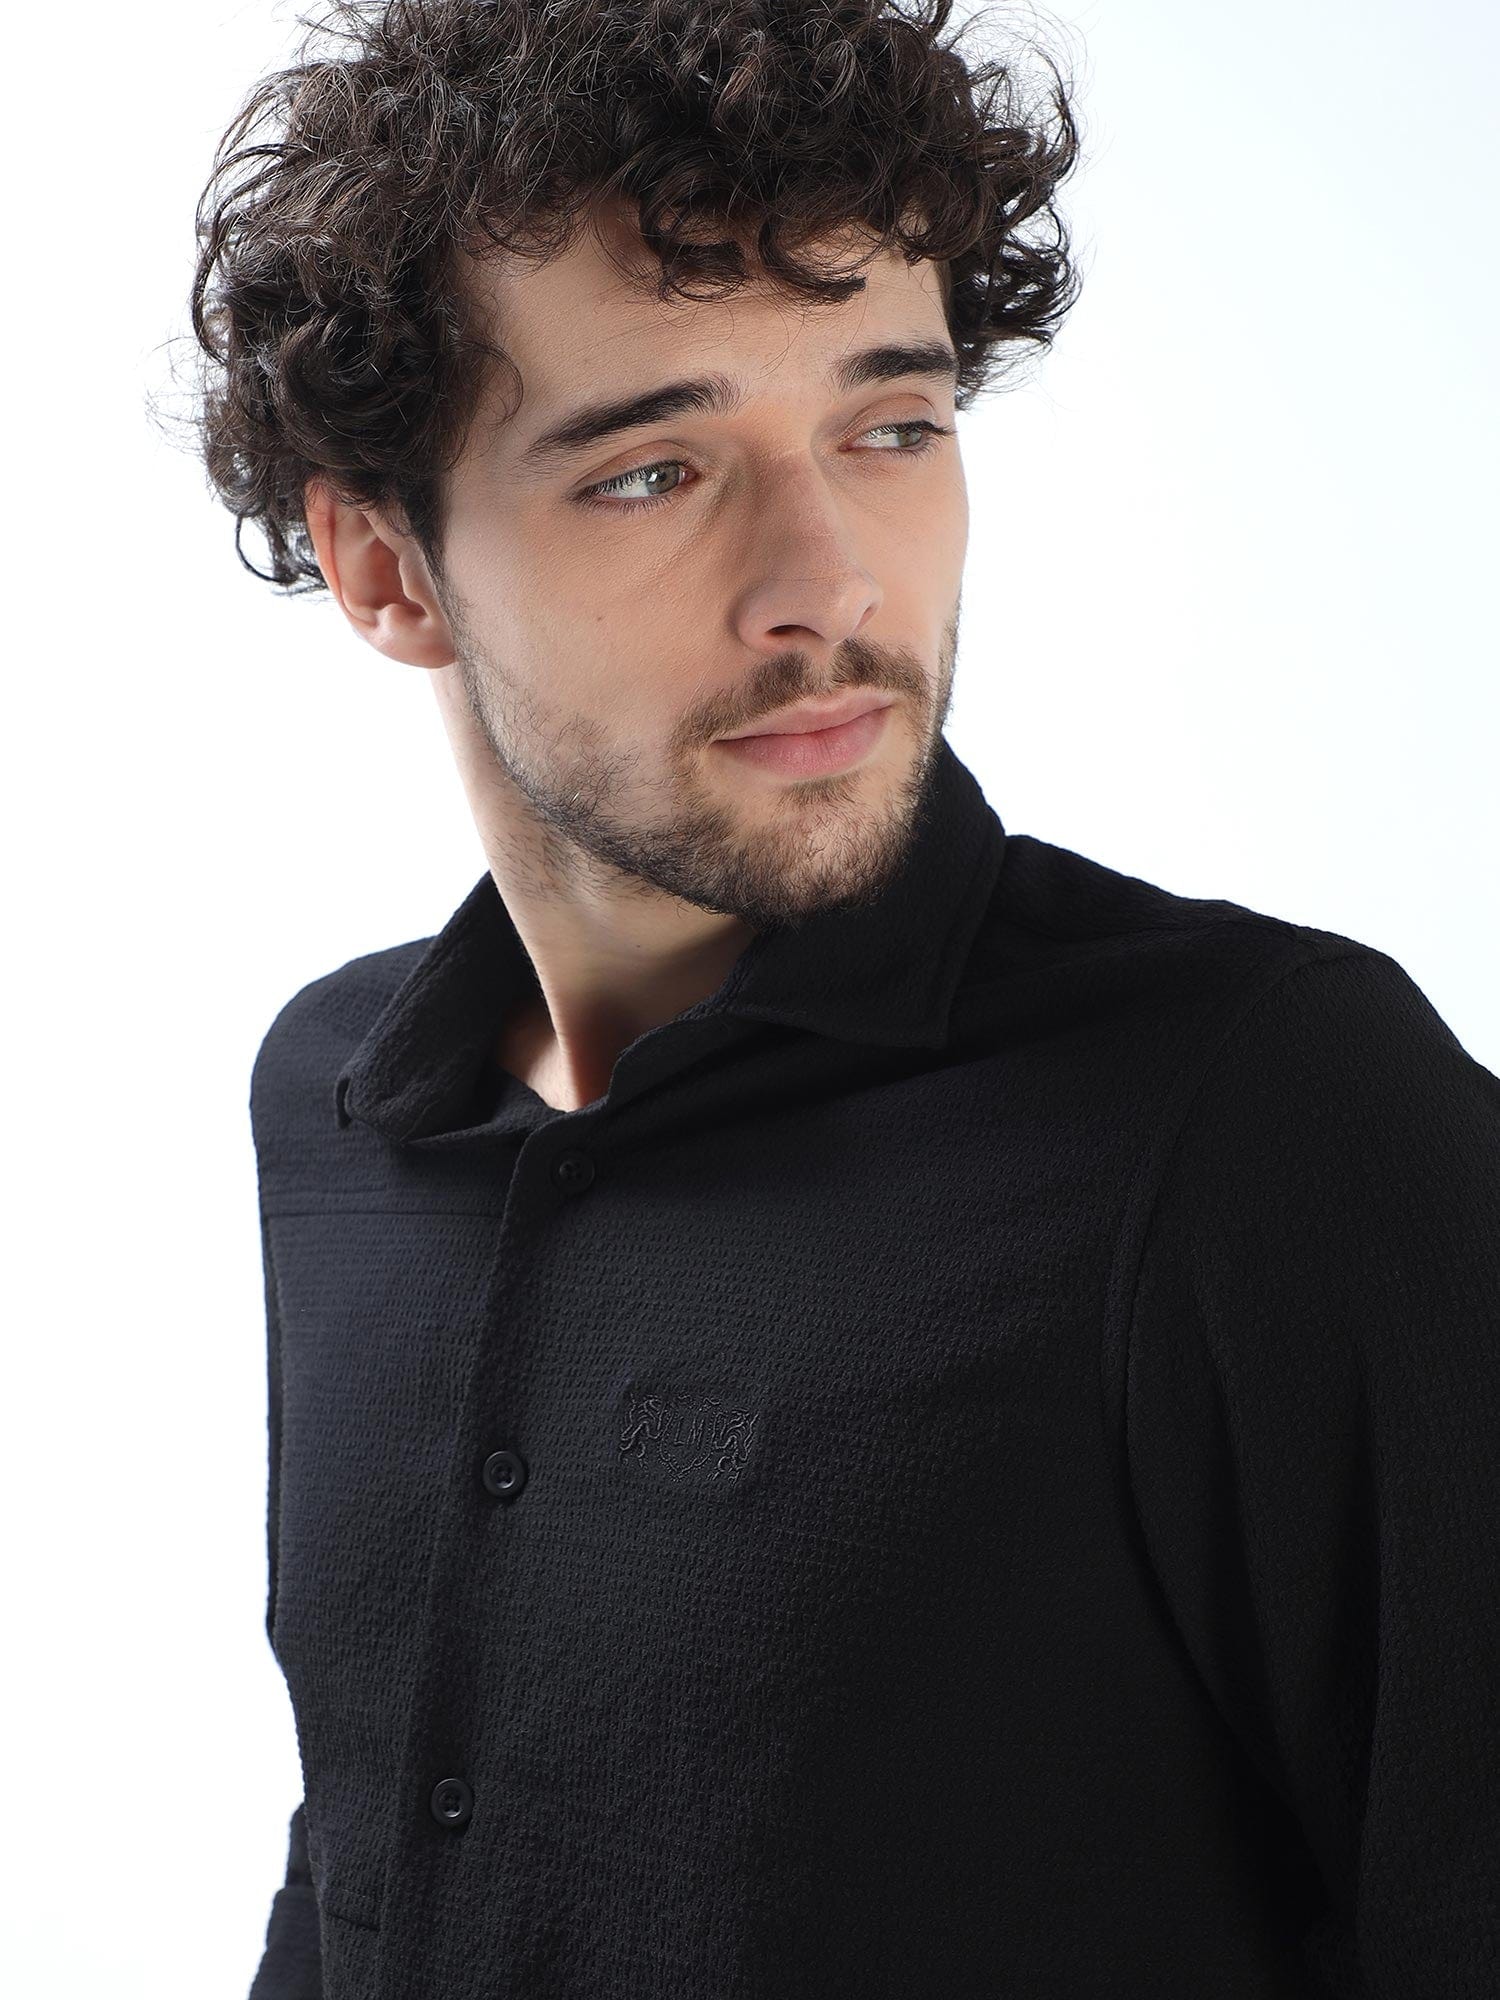 Buy Latest Oil Black Colour Shirt Online At Great PriceRs. 1349.00